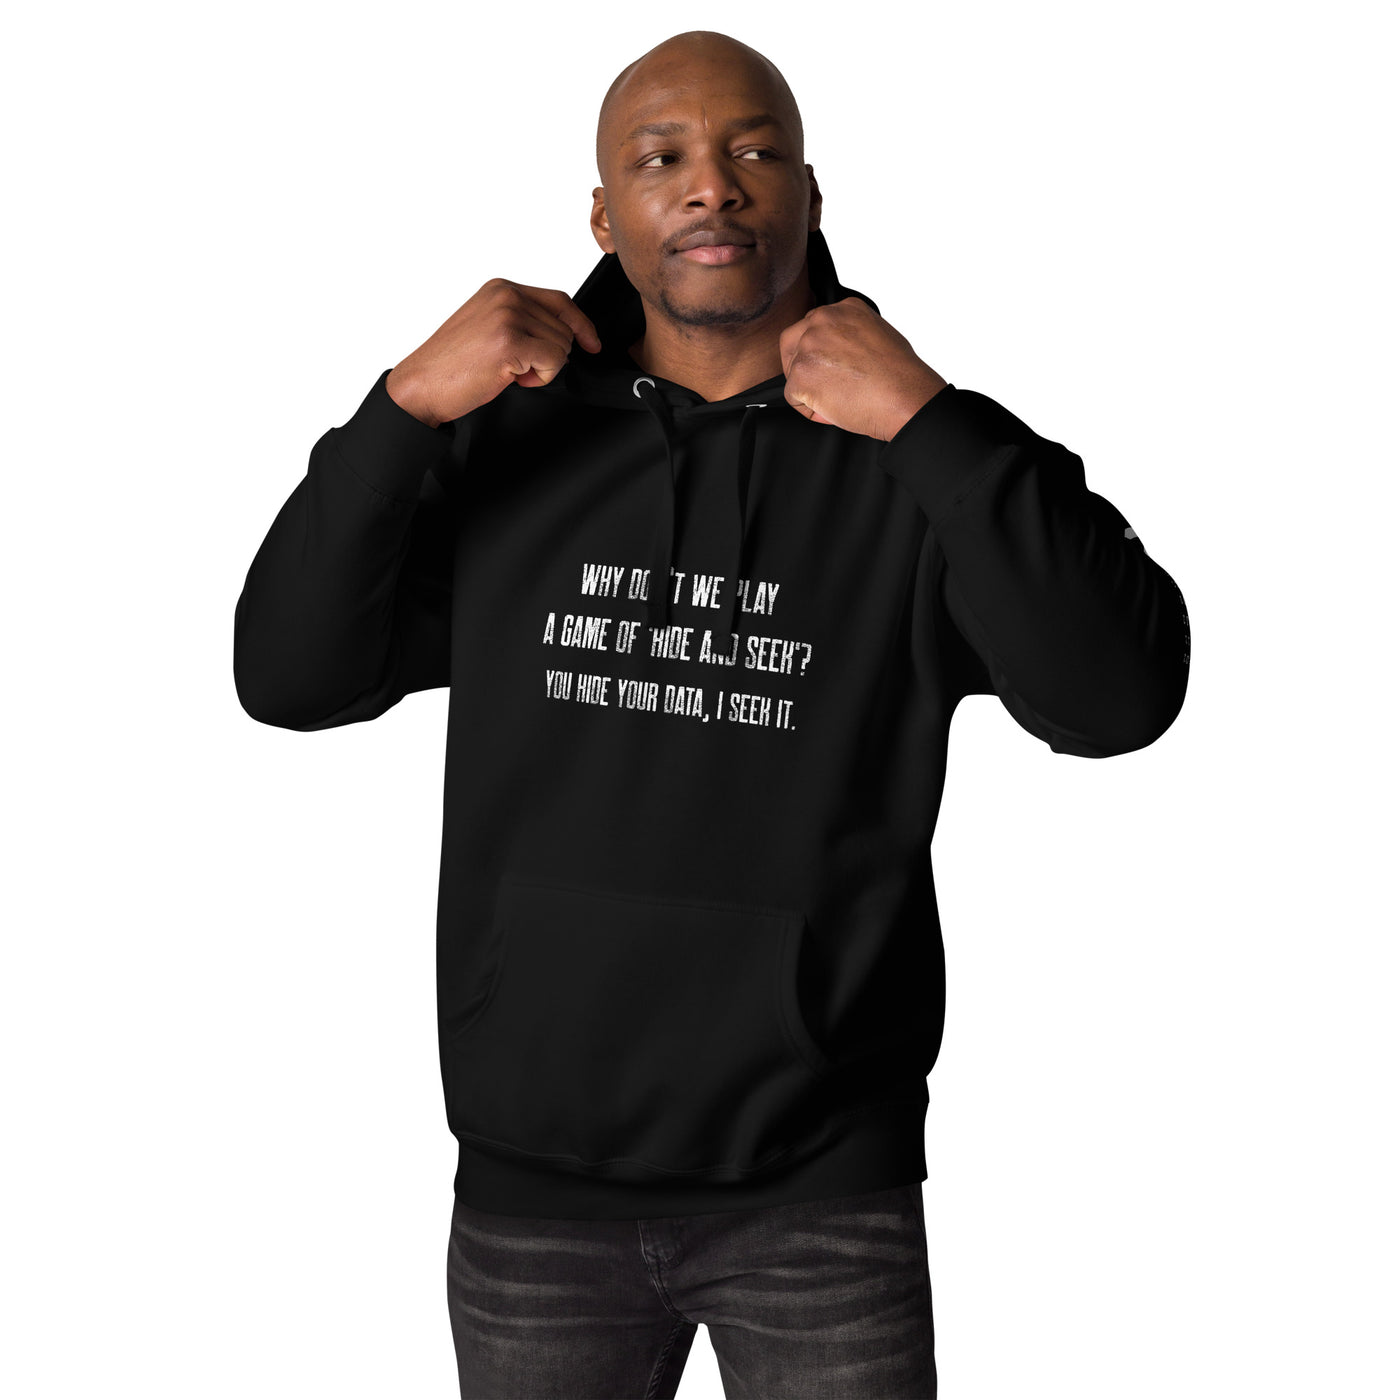 Why don't we Play a game of Hide and Seek - Unisex Hoodie